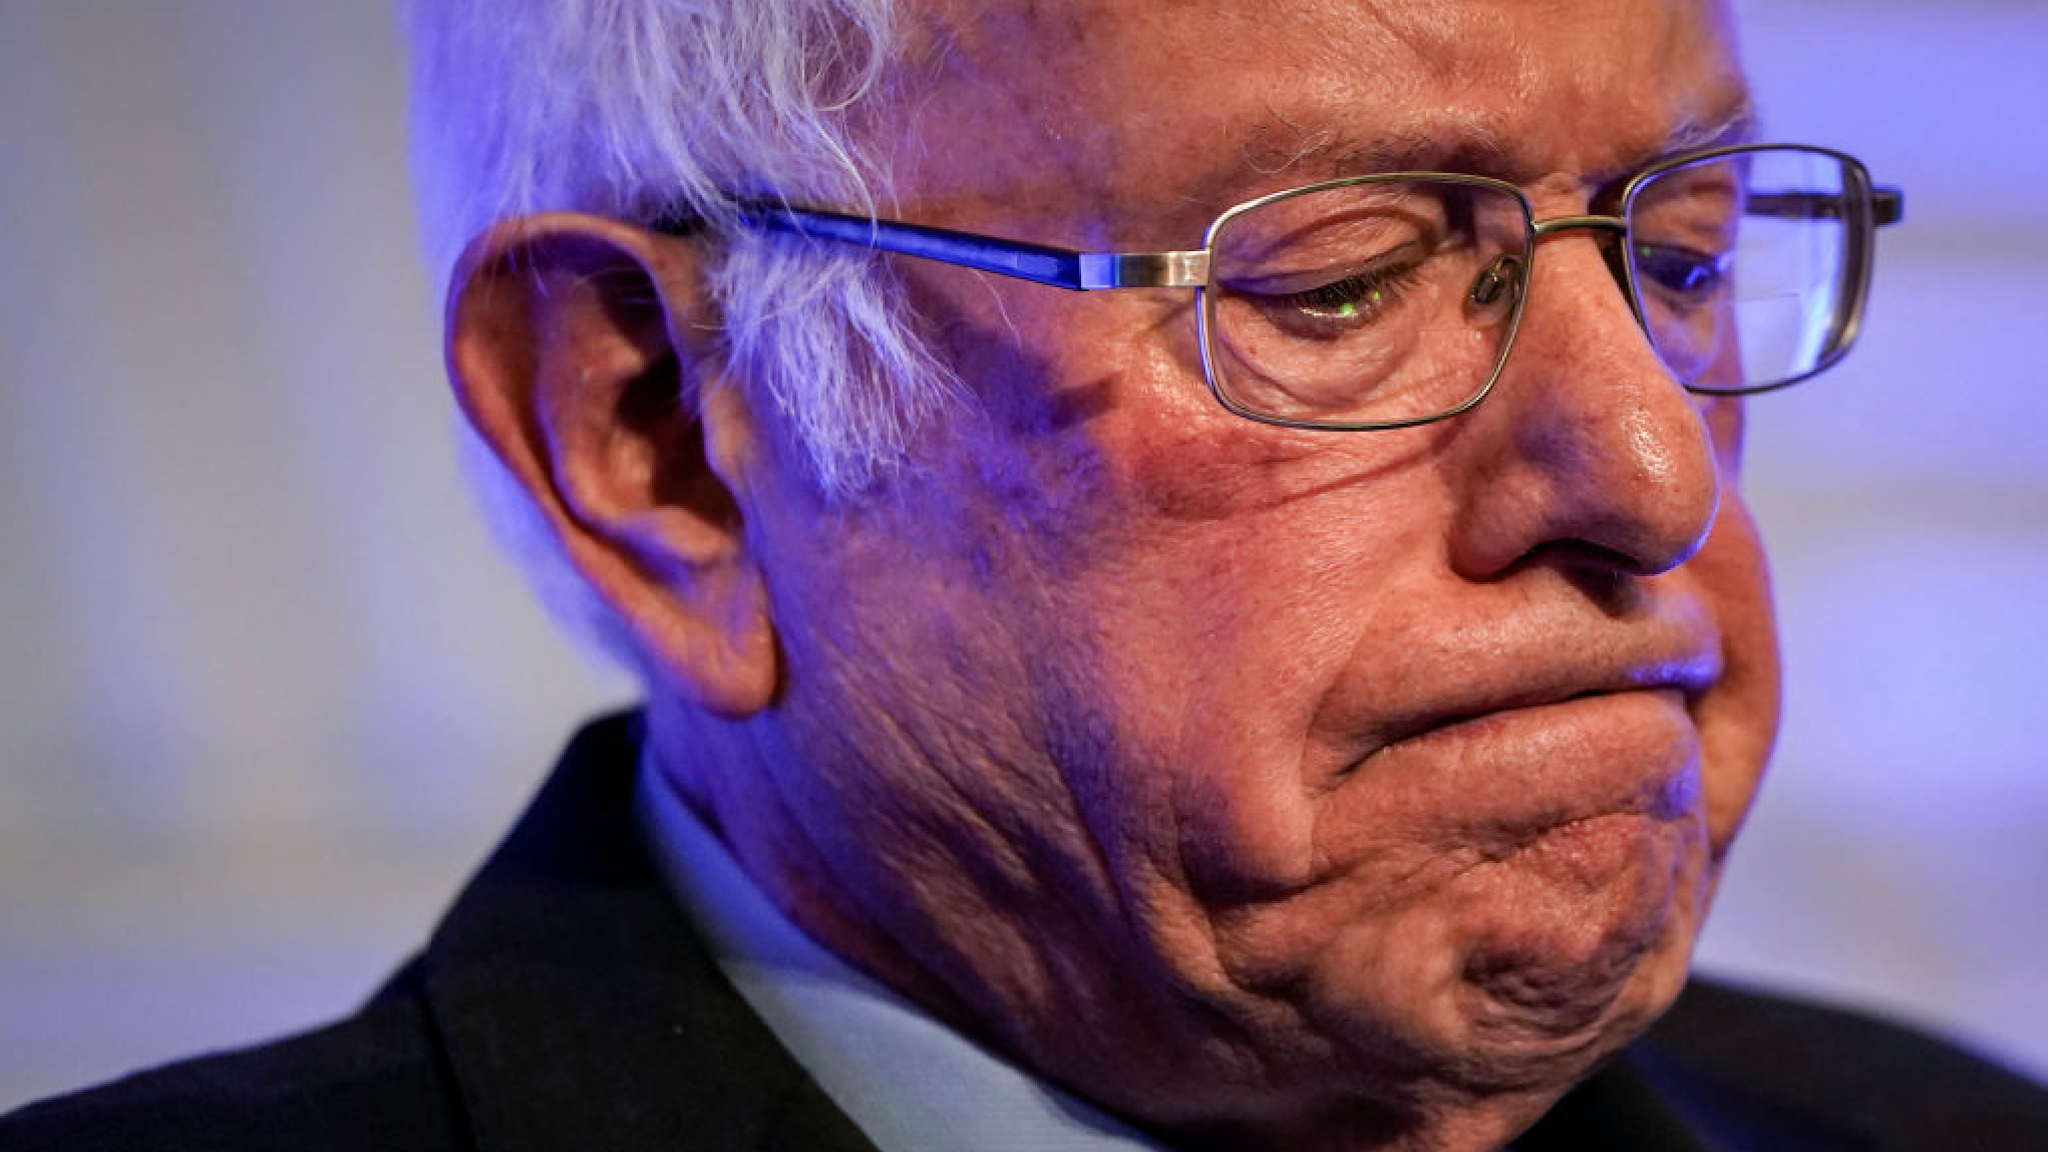 Democratic presidential candidate Sen. Bernie Sanders (I-VT) pauses while speaking at the South Carolina Democratic Party "First in the South" dinner on February 24, 2020 in Charleston, South Carolina.